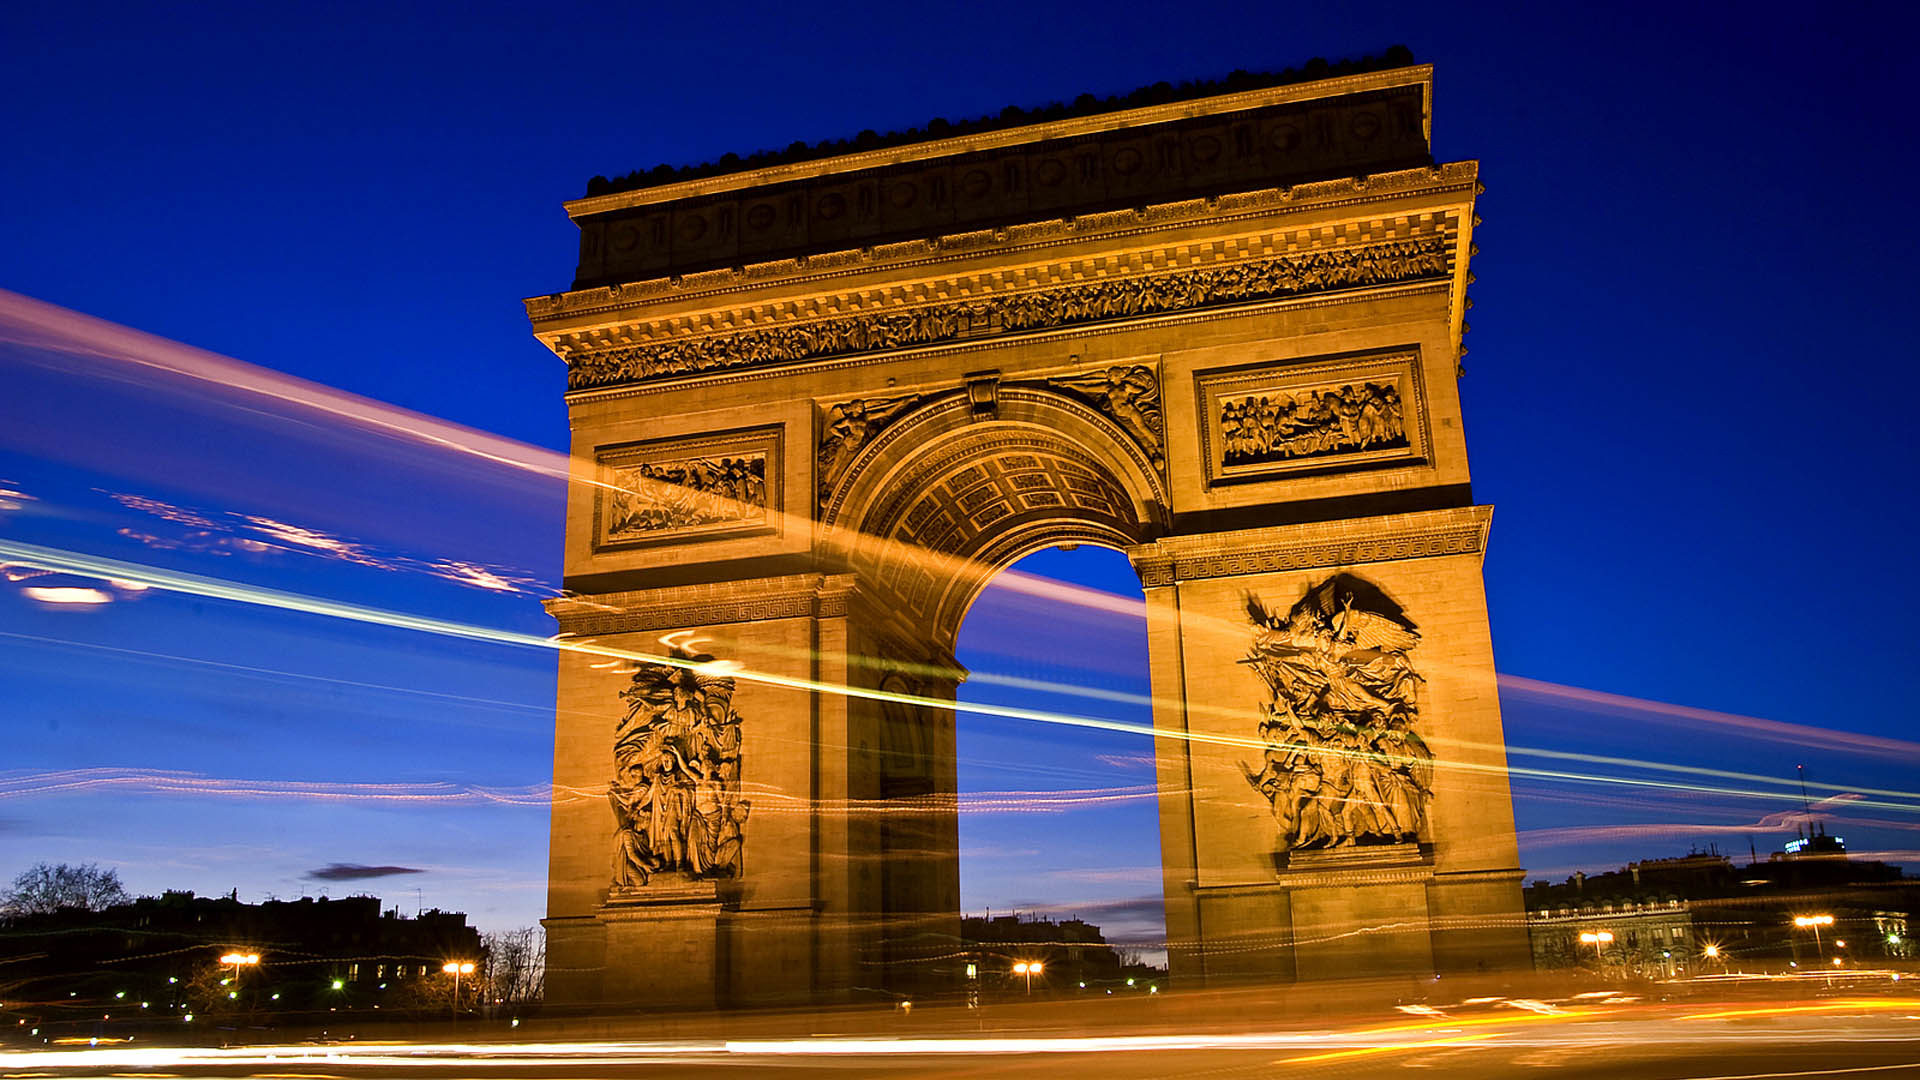 Paris: Arc de Triomphe, The western end of the Champs-Elysees. 1920x1080 Full HD Wallpaper.